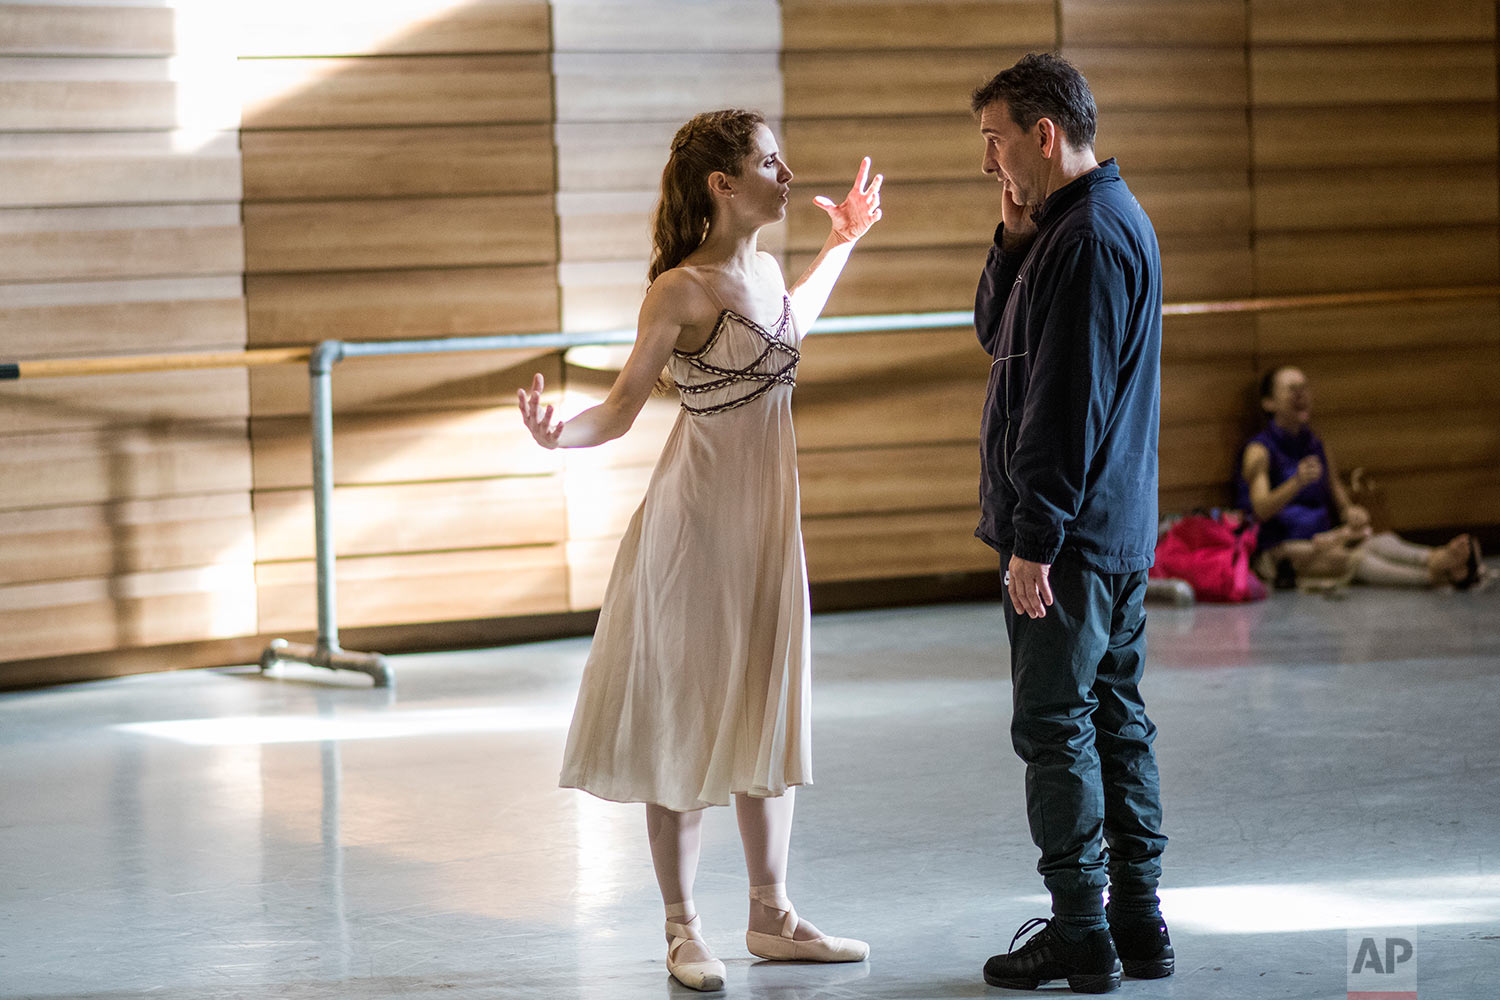  In this Tuesday, Sept. 12, 2017 photo, Director Julio Bocca instructs principal ballet dancer Maria Noel Riccetto during rehearsal for Romeo and Juliet in Montevideo, Uruguay. (AP Photo/Matilde Campodonico) 